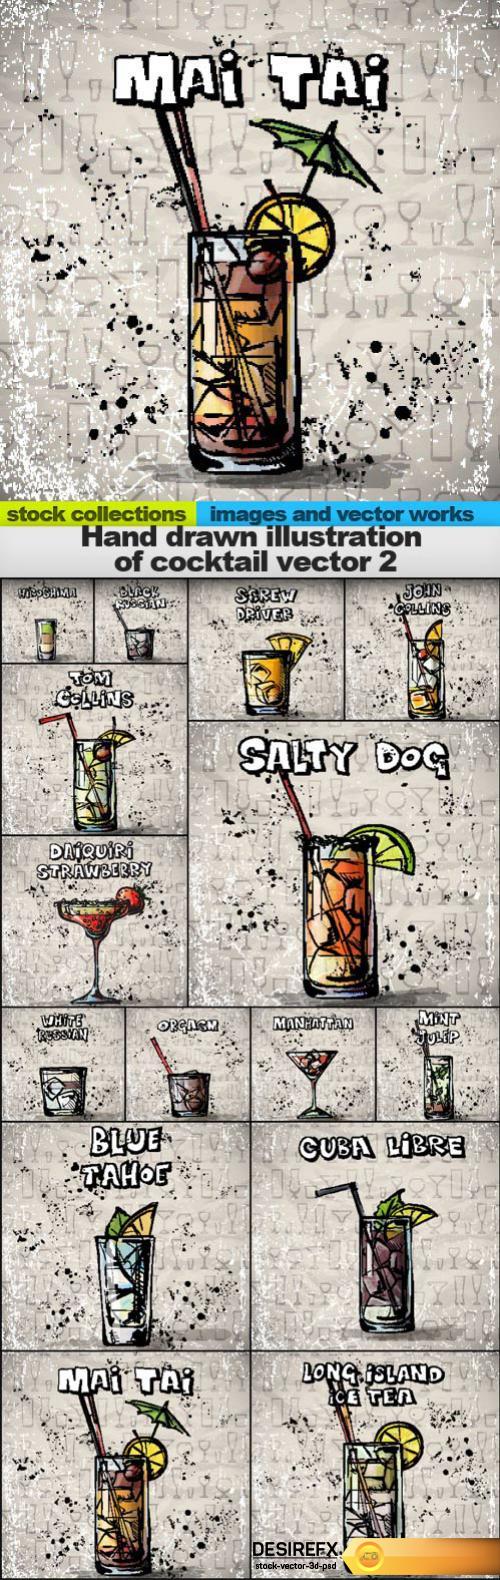 Hand drawn illustration of cocktail vector 2, 15 x EPS